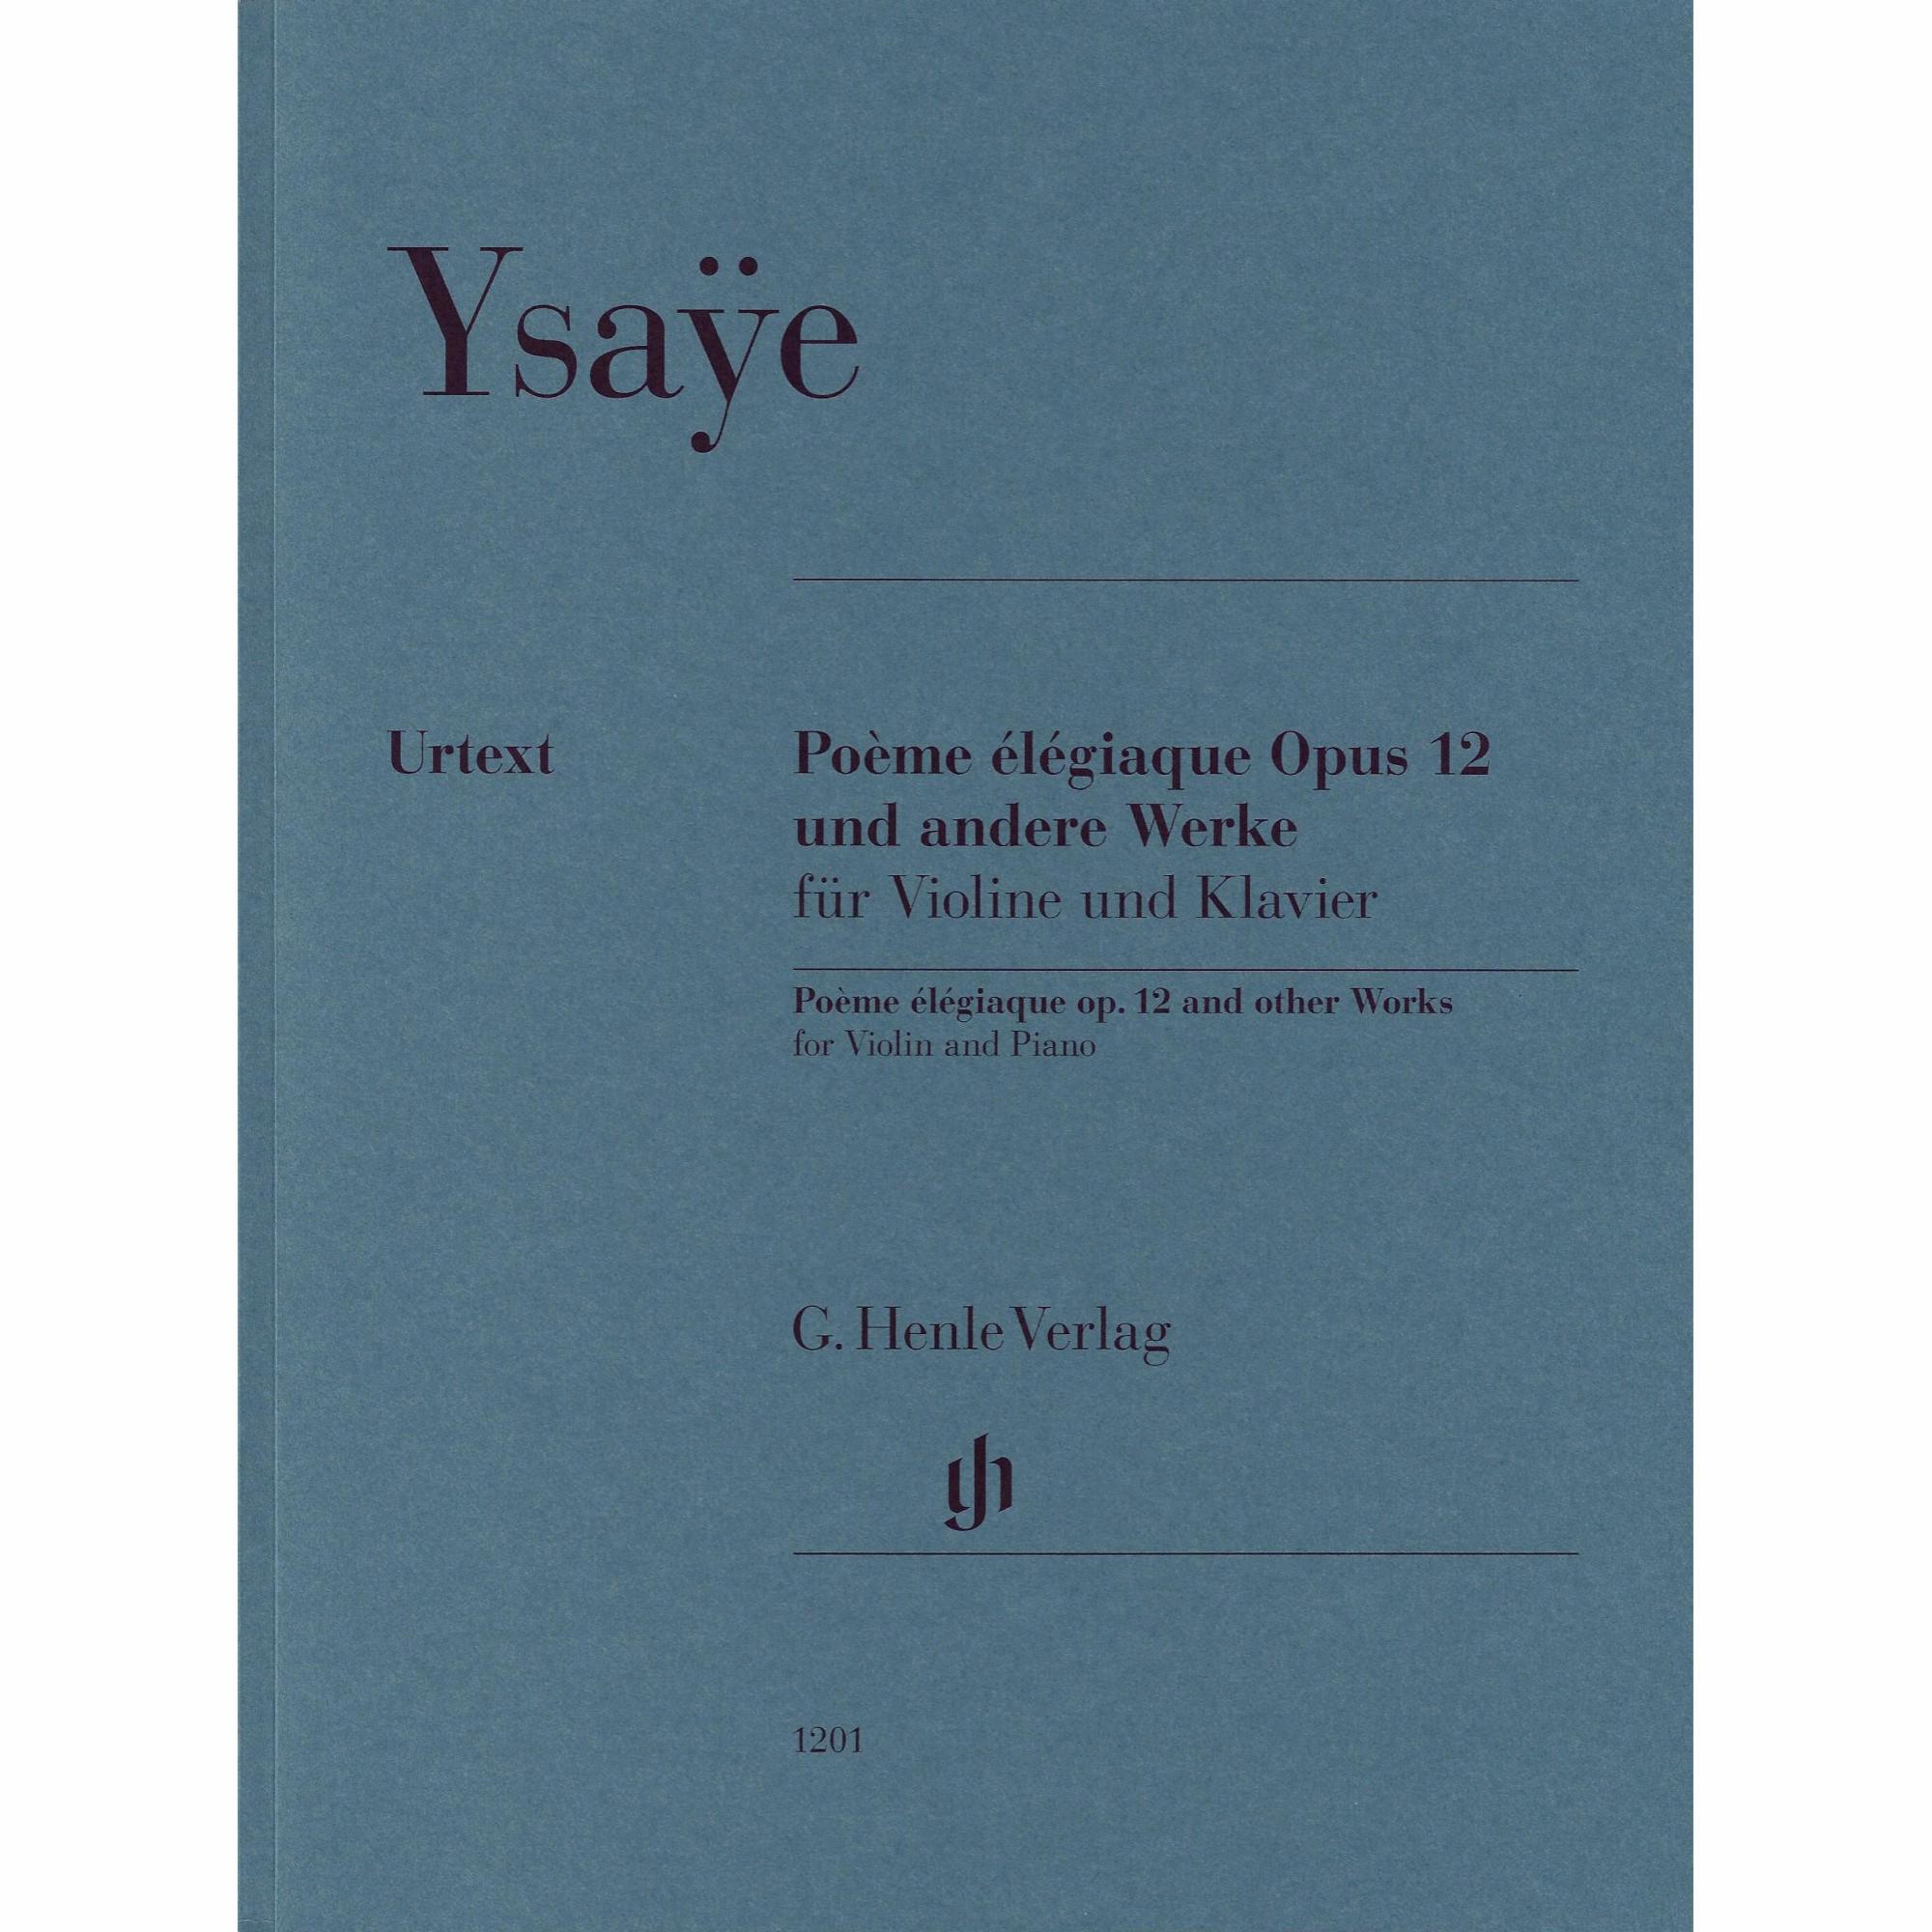 Ysaye -- Poeme elegiaque, Op. 12 and Other Works for Violin and Piano